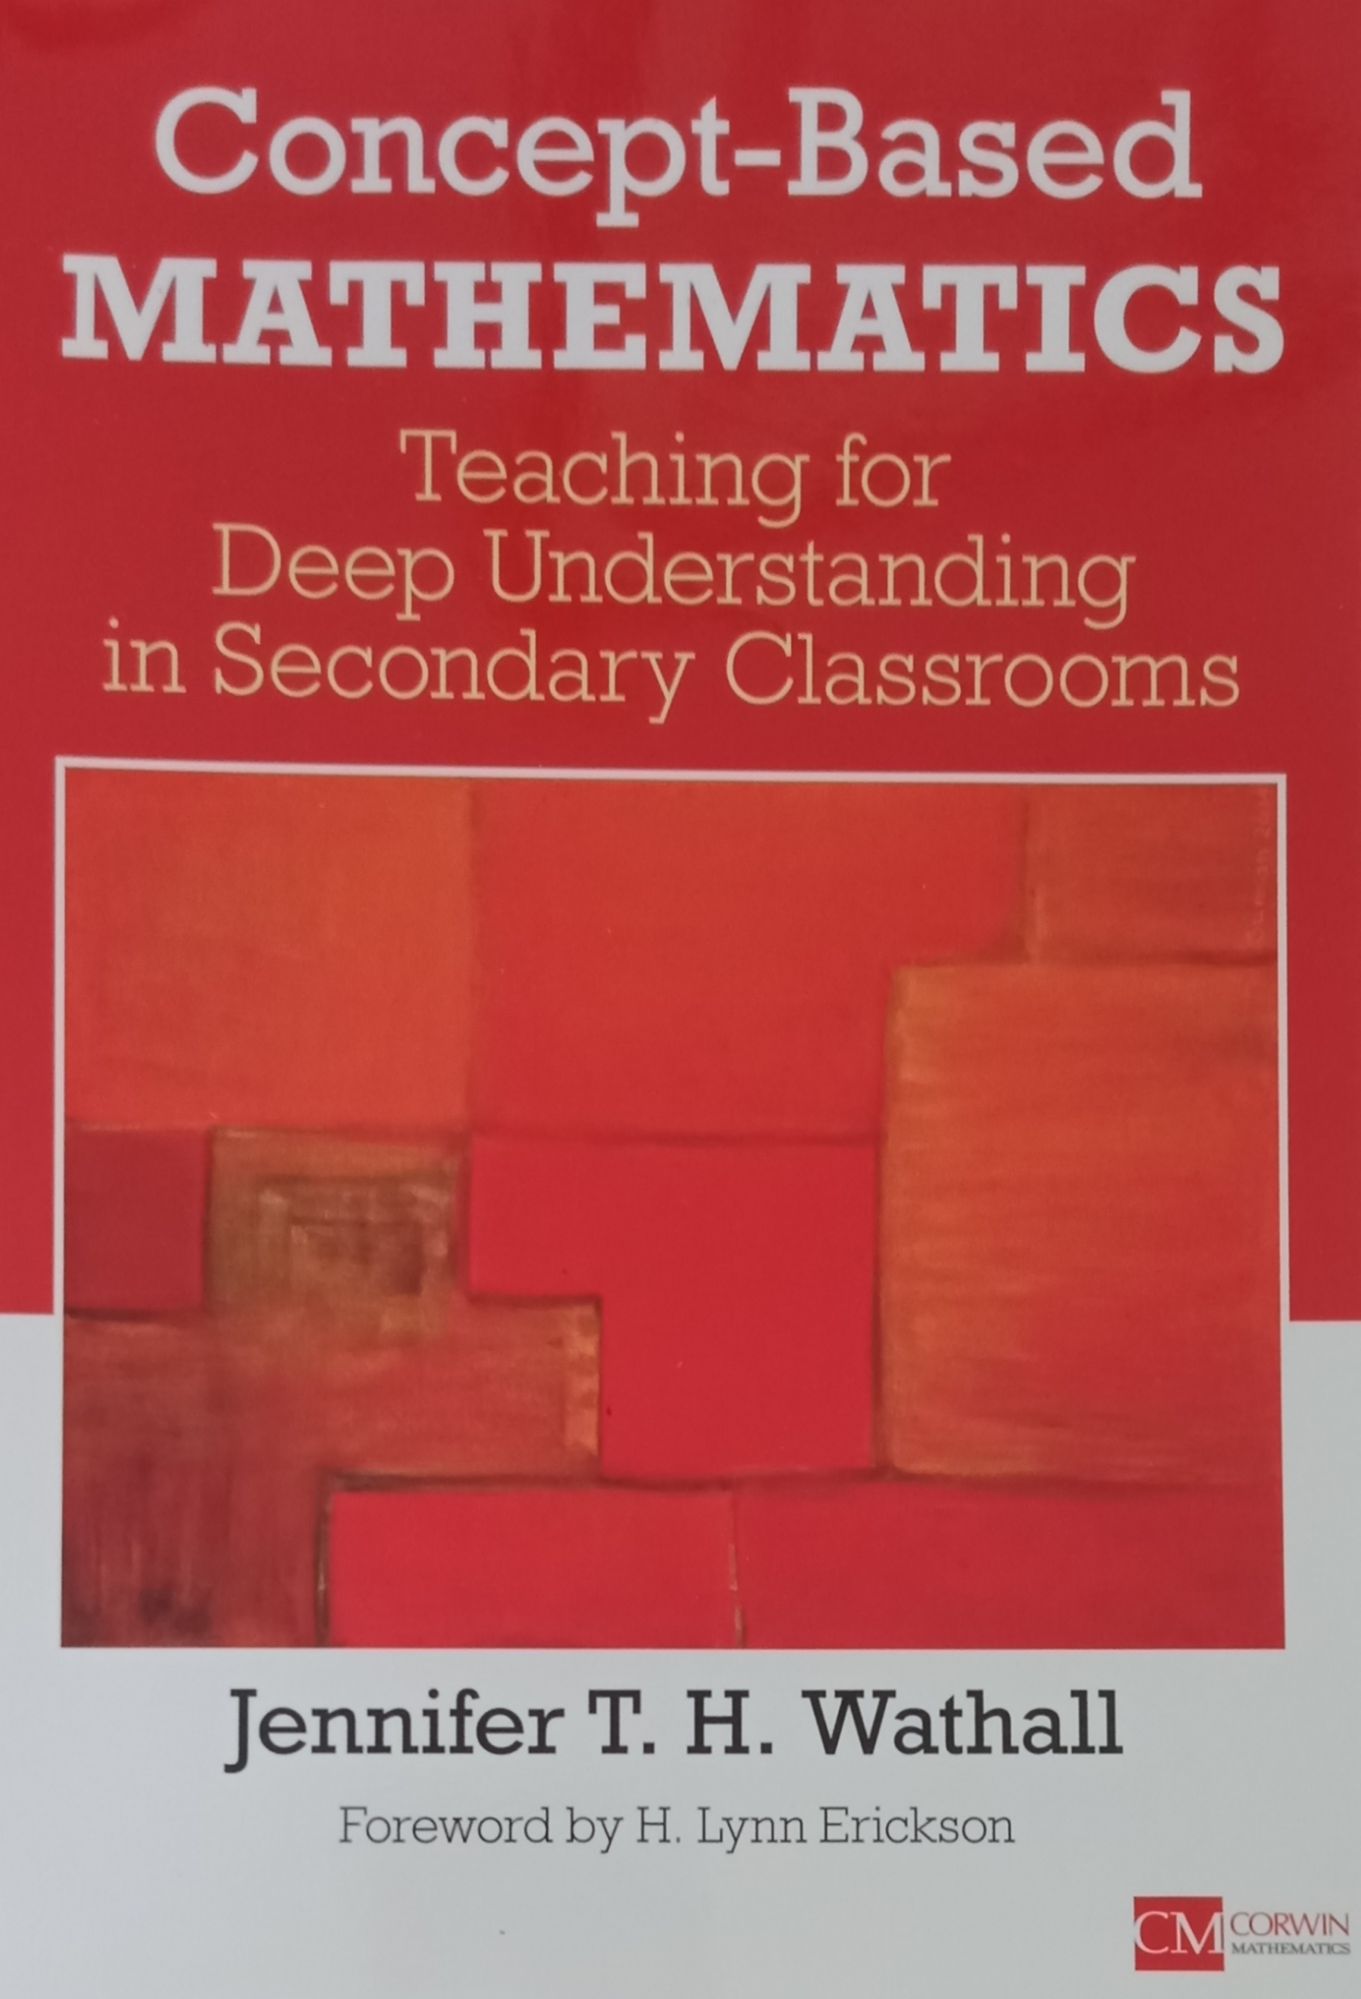 Concept-Based Mathematics : Teaching for Deep Understanding in Secondary Classrooms
(Paperback)